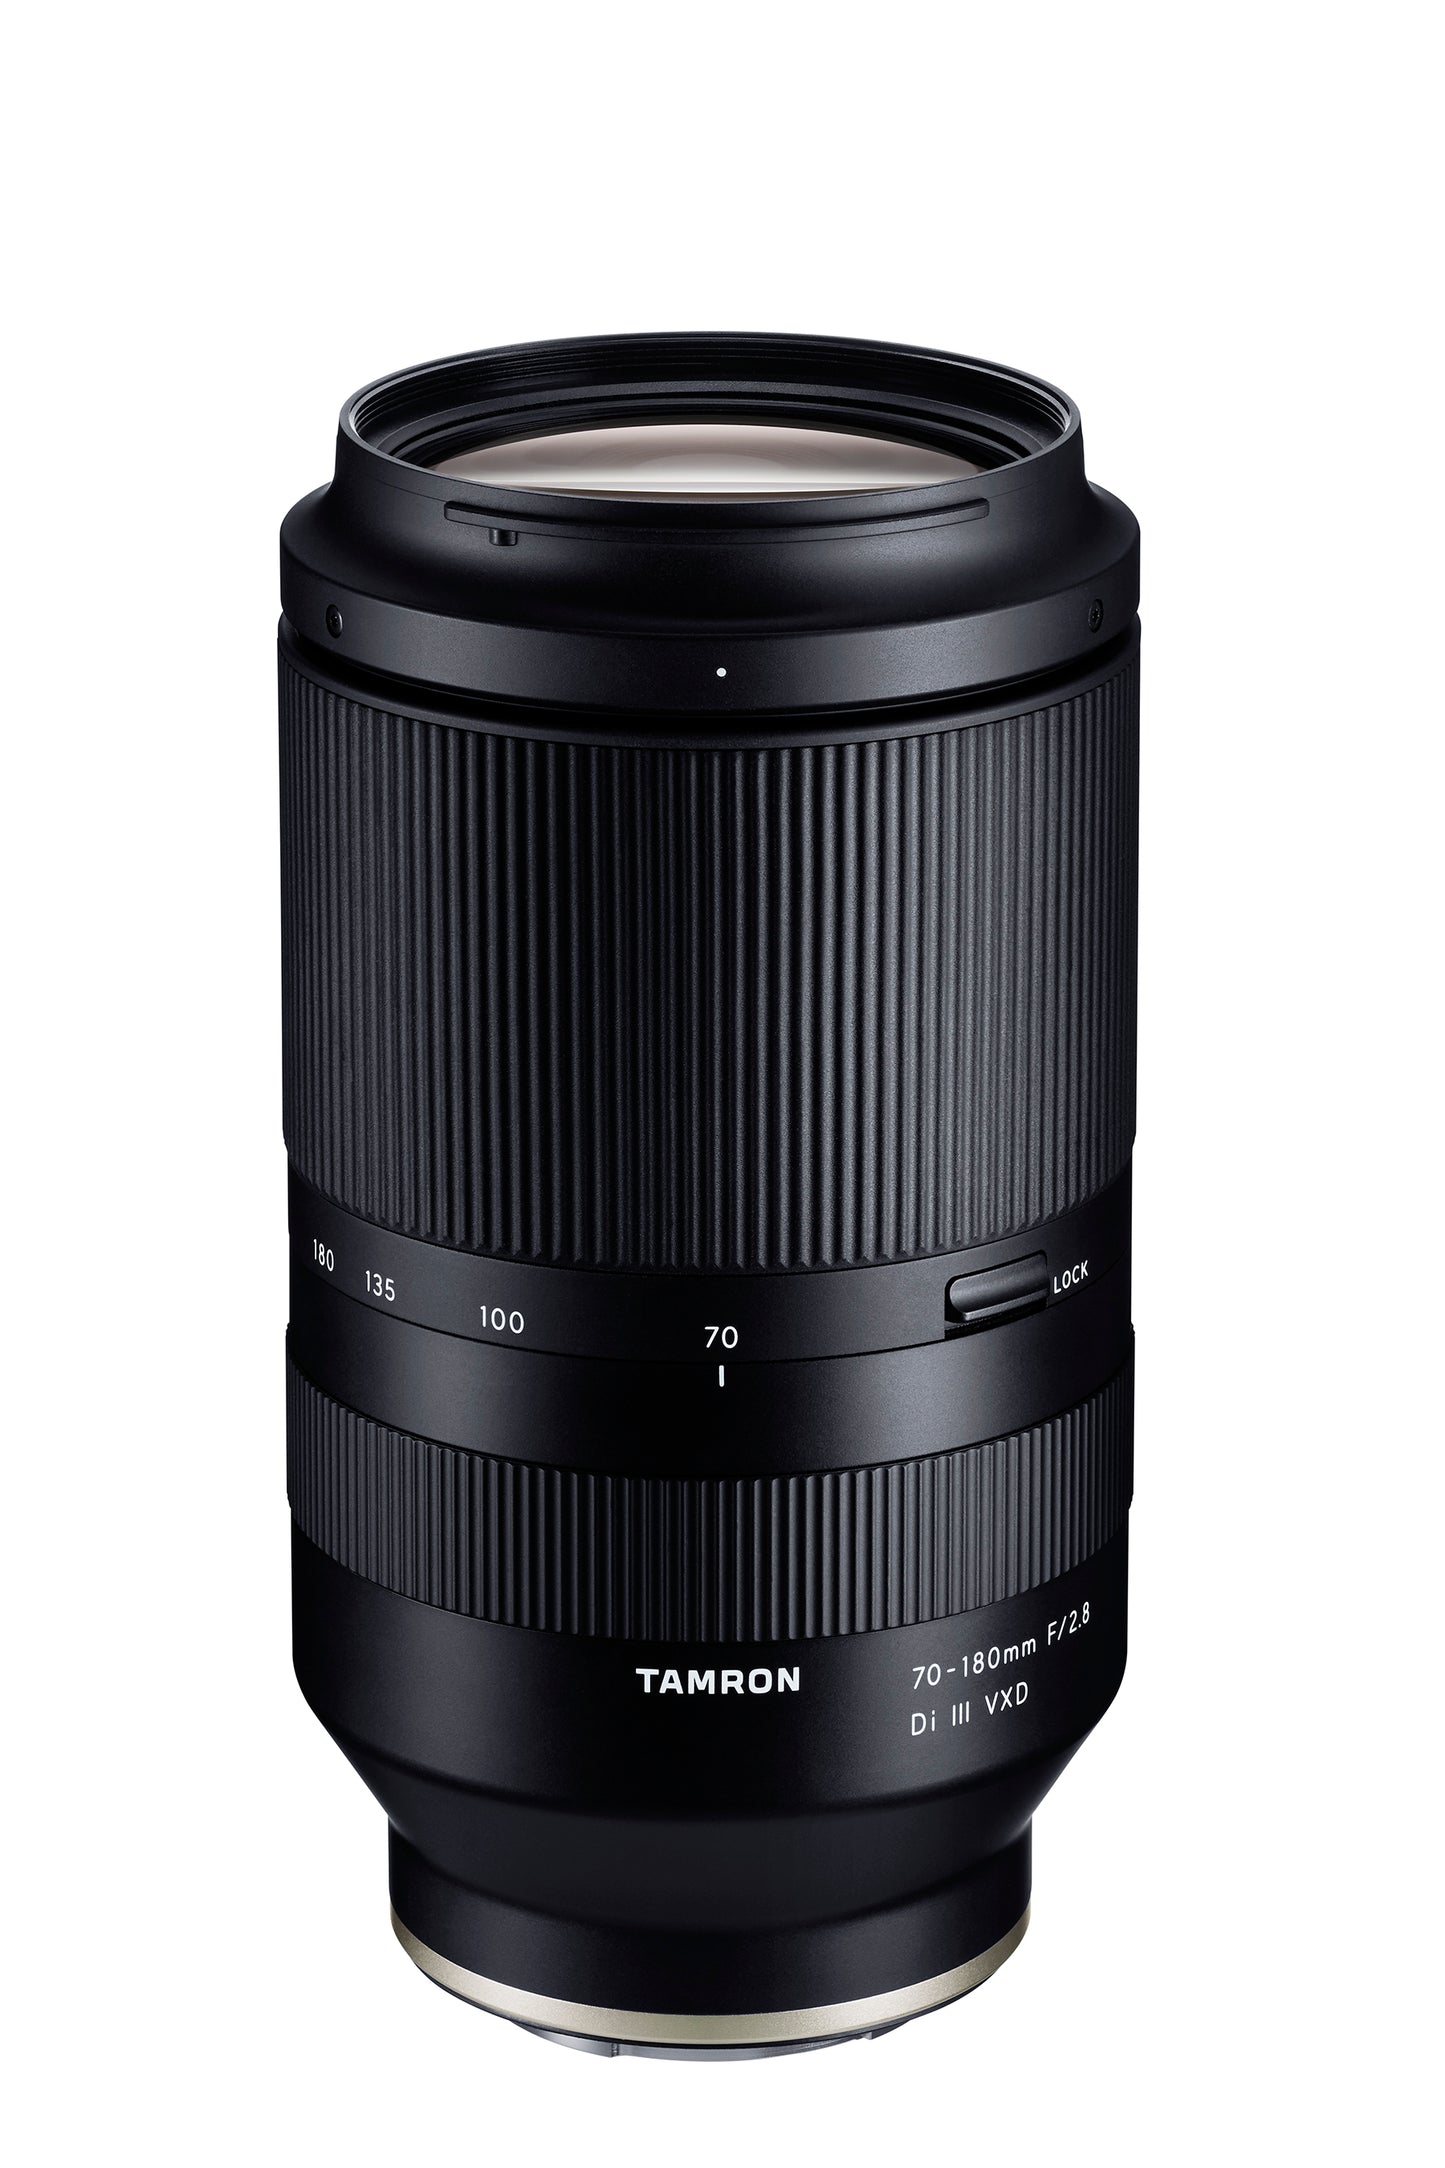 Tamron 70-180mm F/2.8 Di III VXD for Sony A056